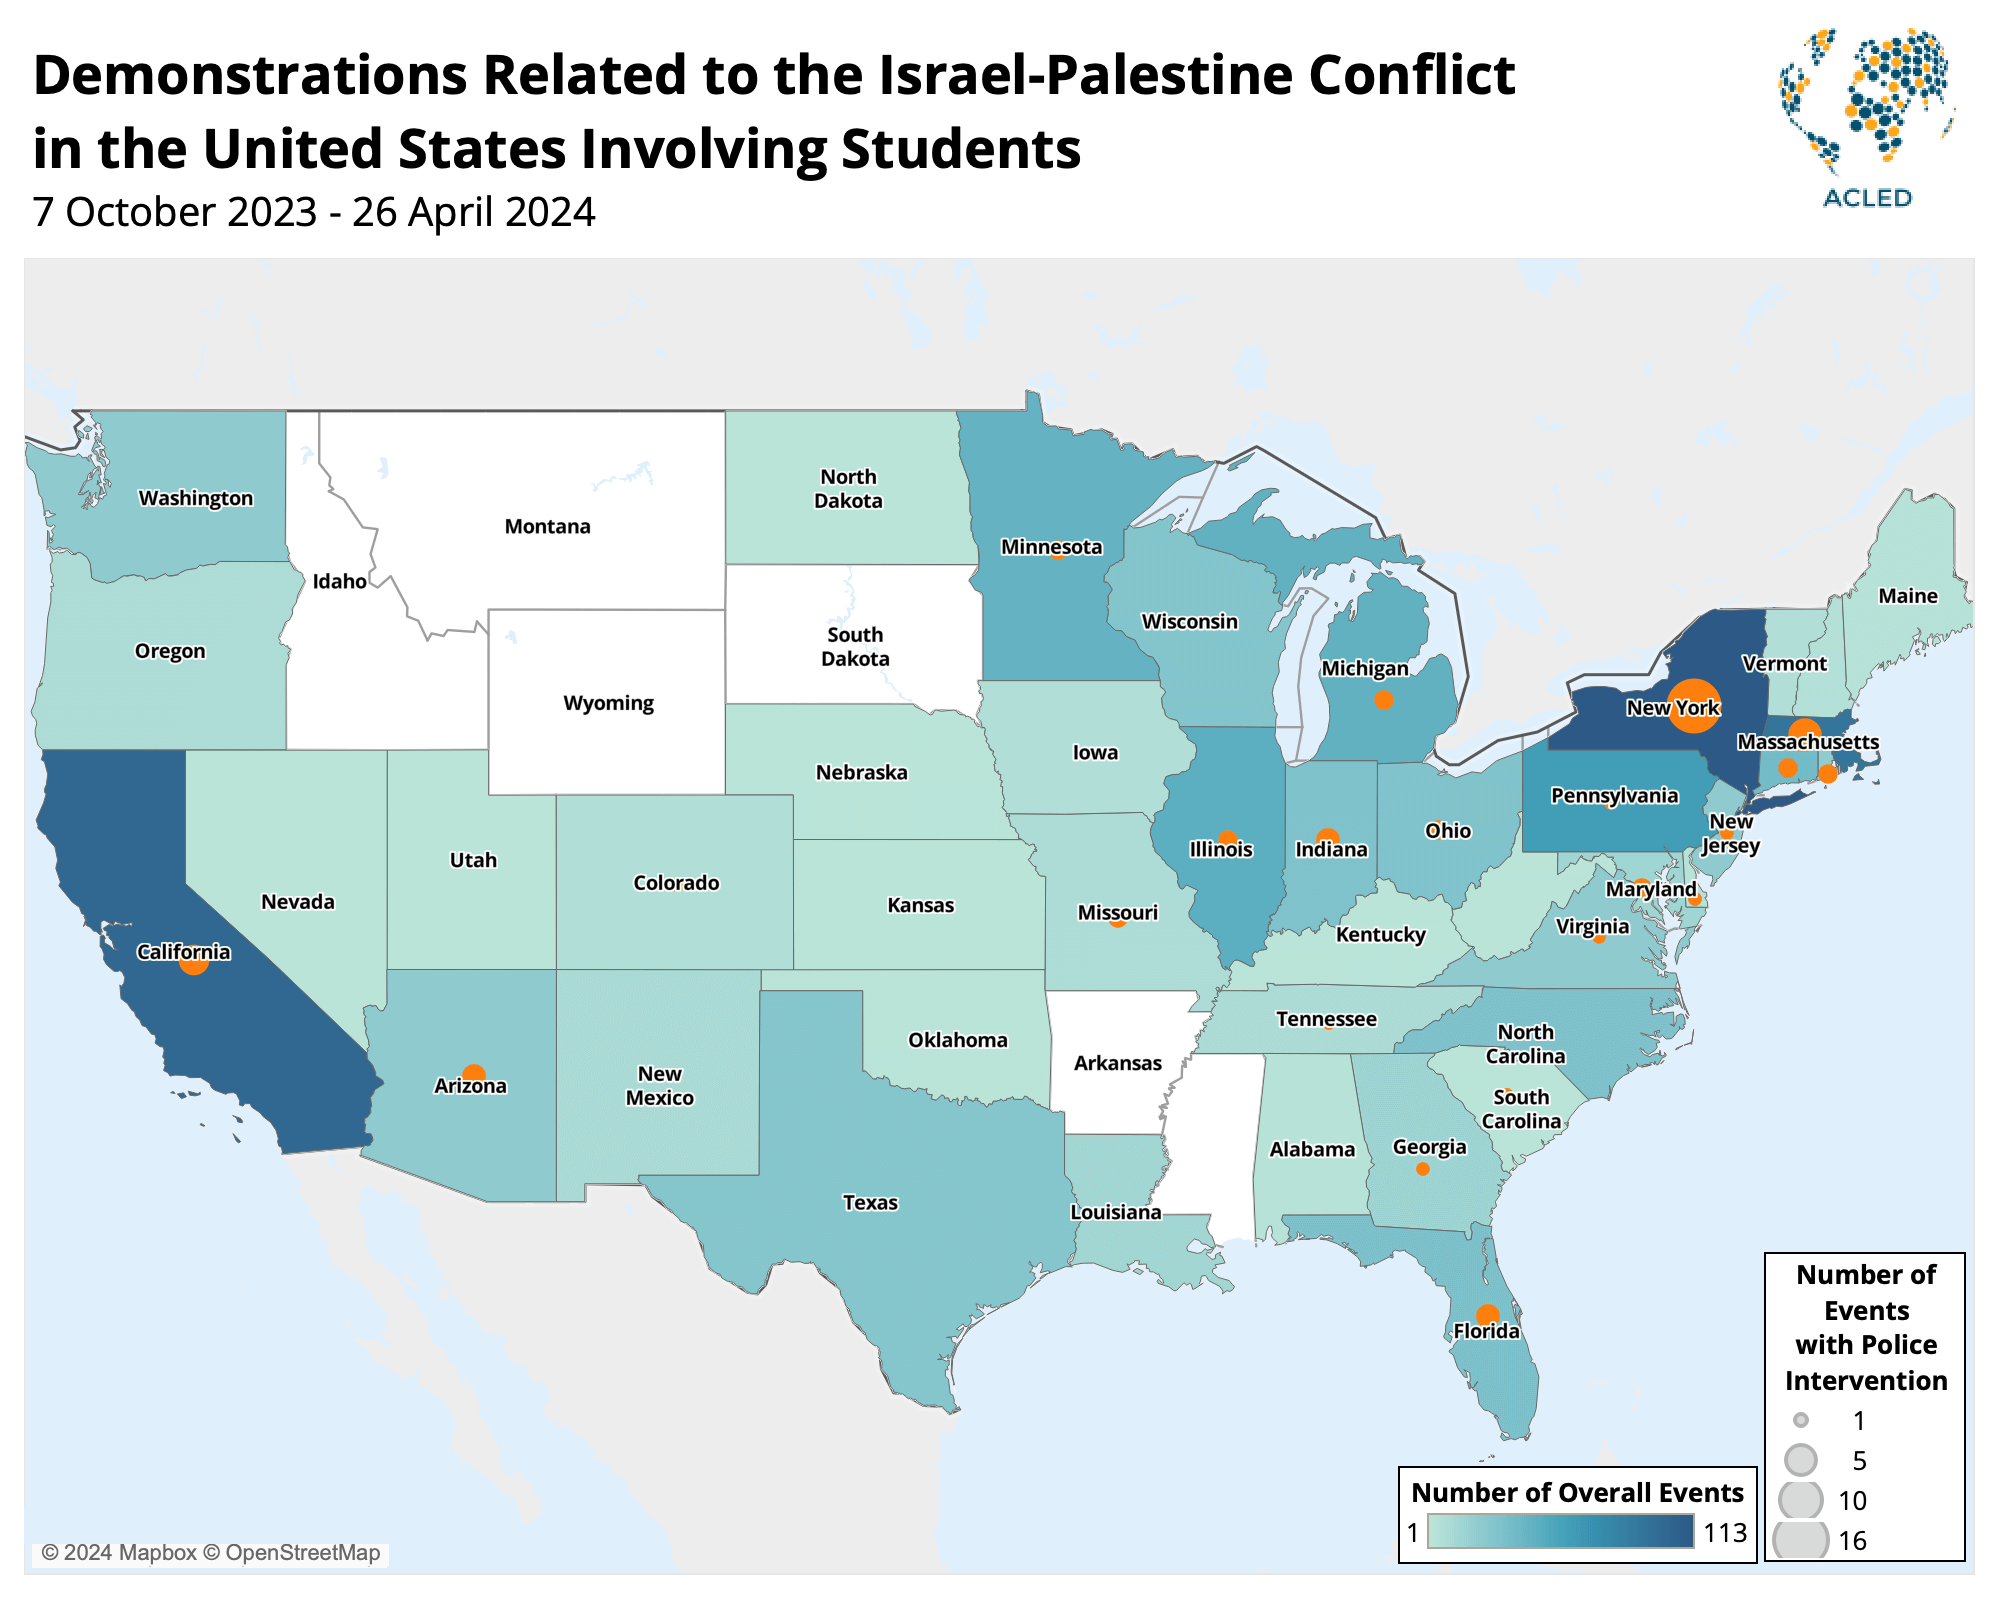 Map - Demonstrations related to the Israel-Palestine conflict in the United States involving students - April 2024